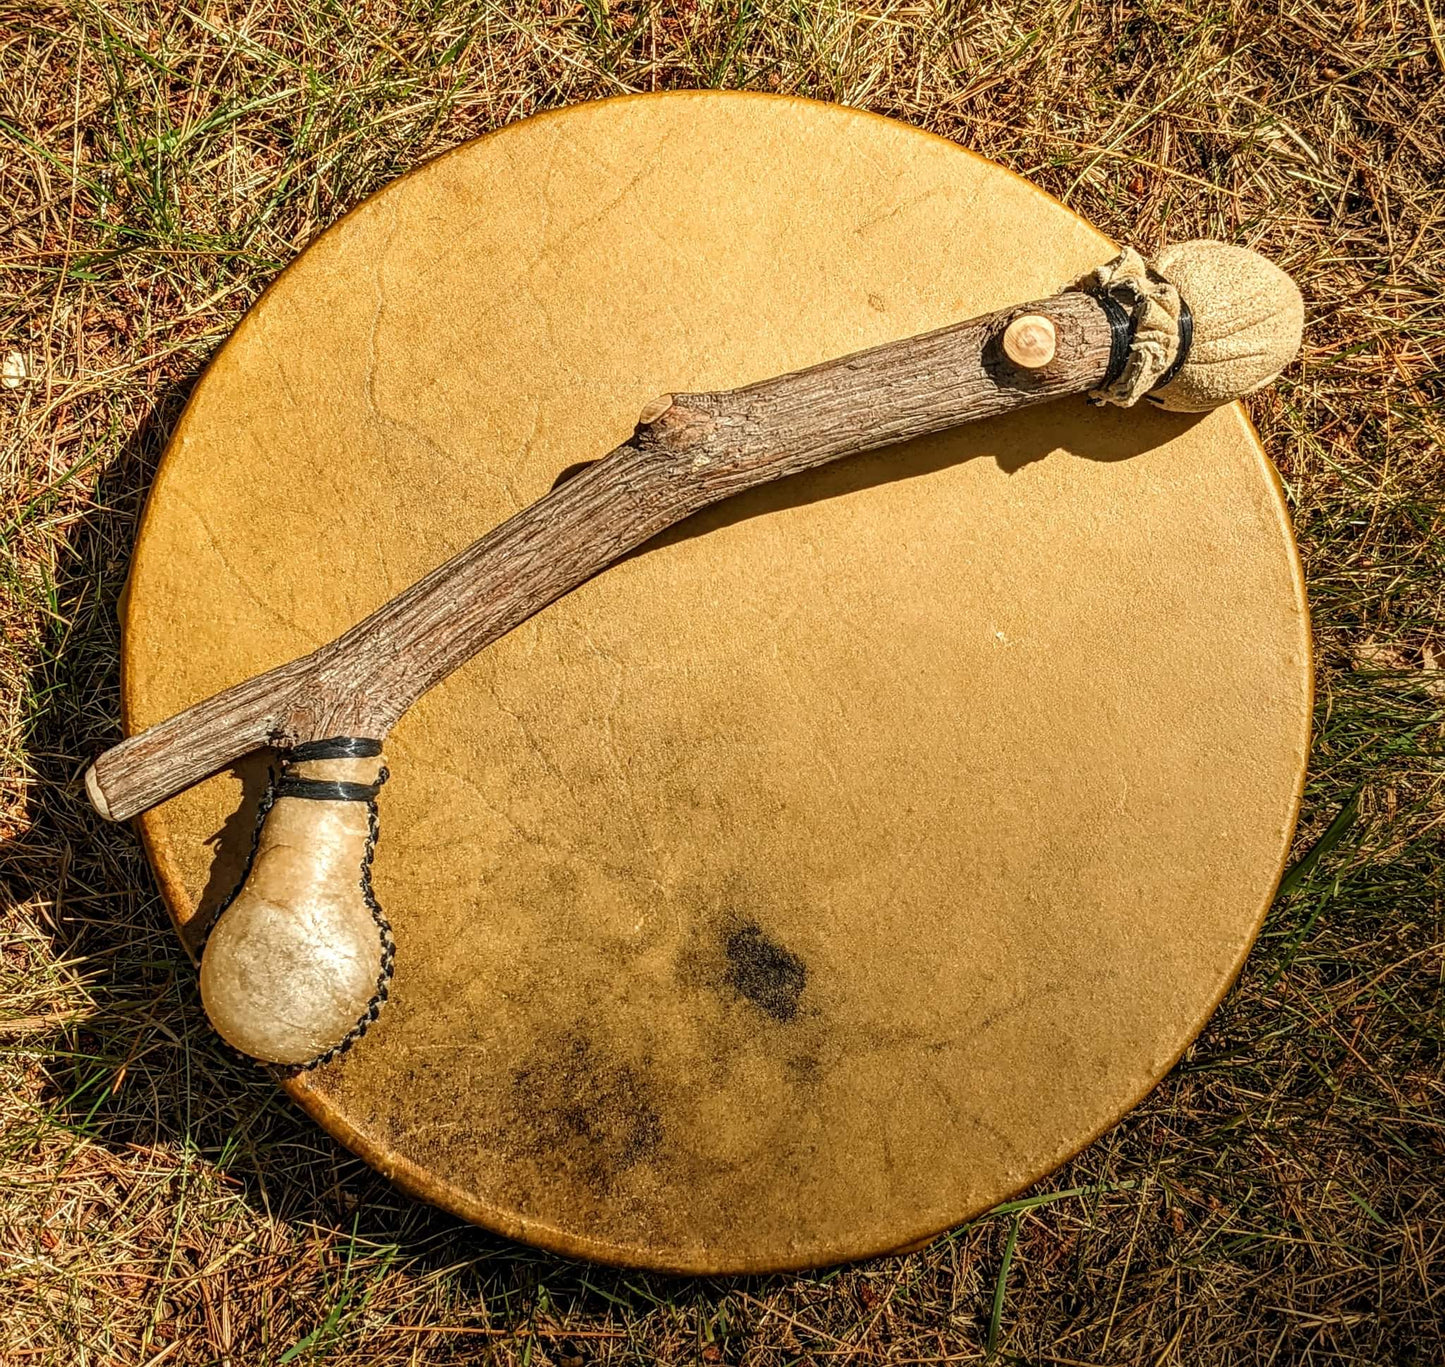 12" Bison Hide Drum With Rattle Ended Beater